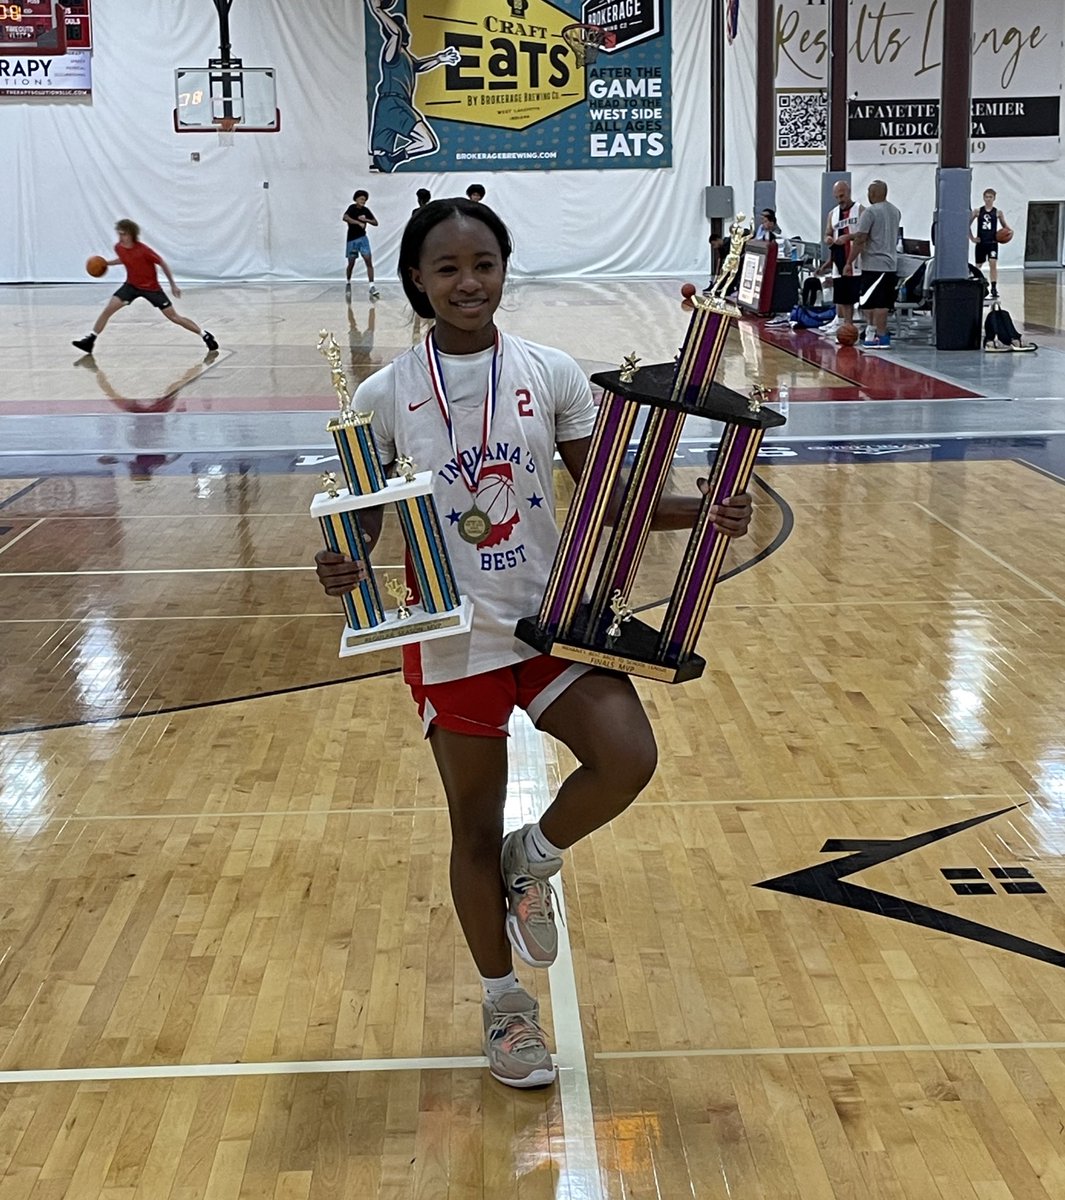 26’ Trinity Wilburn, Faith Christian, was named both League & Finals MVP for the Indiana’s Best back to school league.